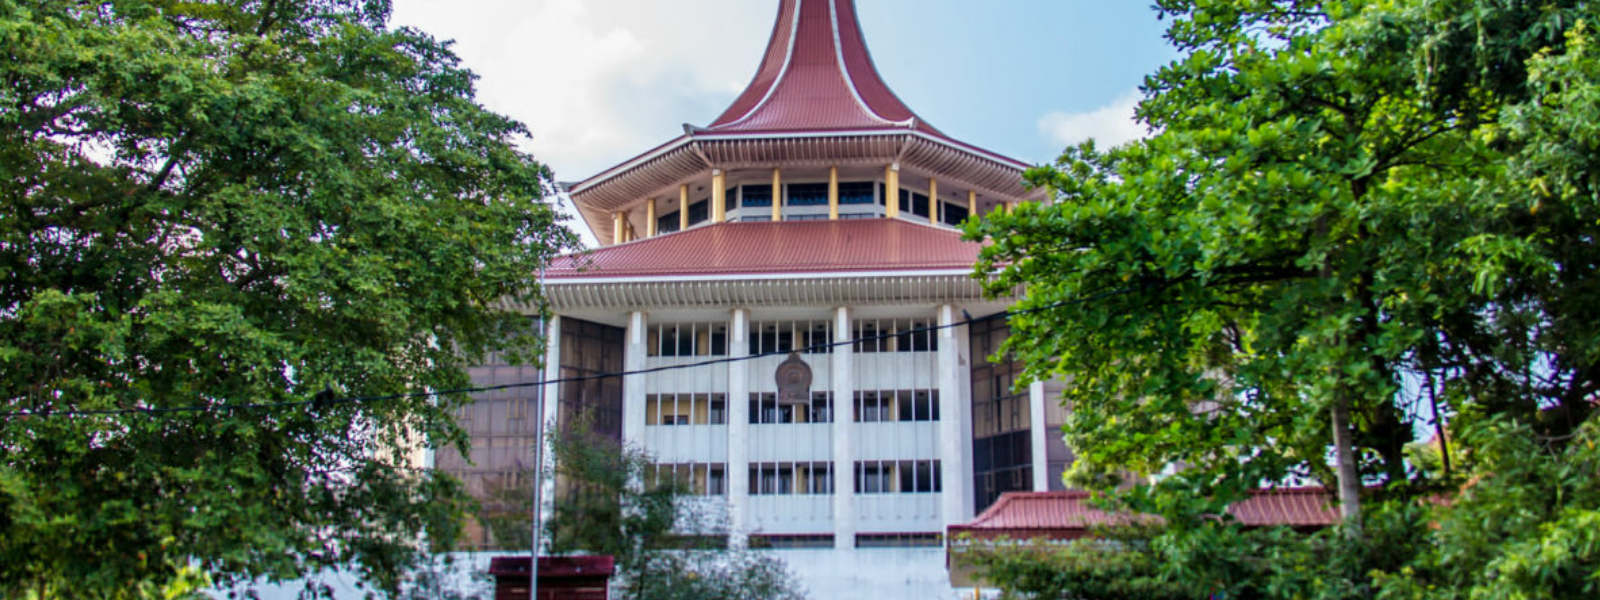 SC issues order to hold election for Elpitiya PS